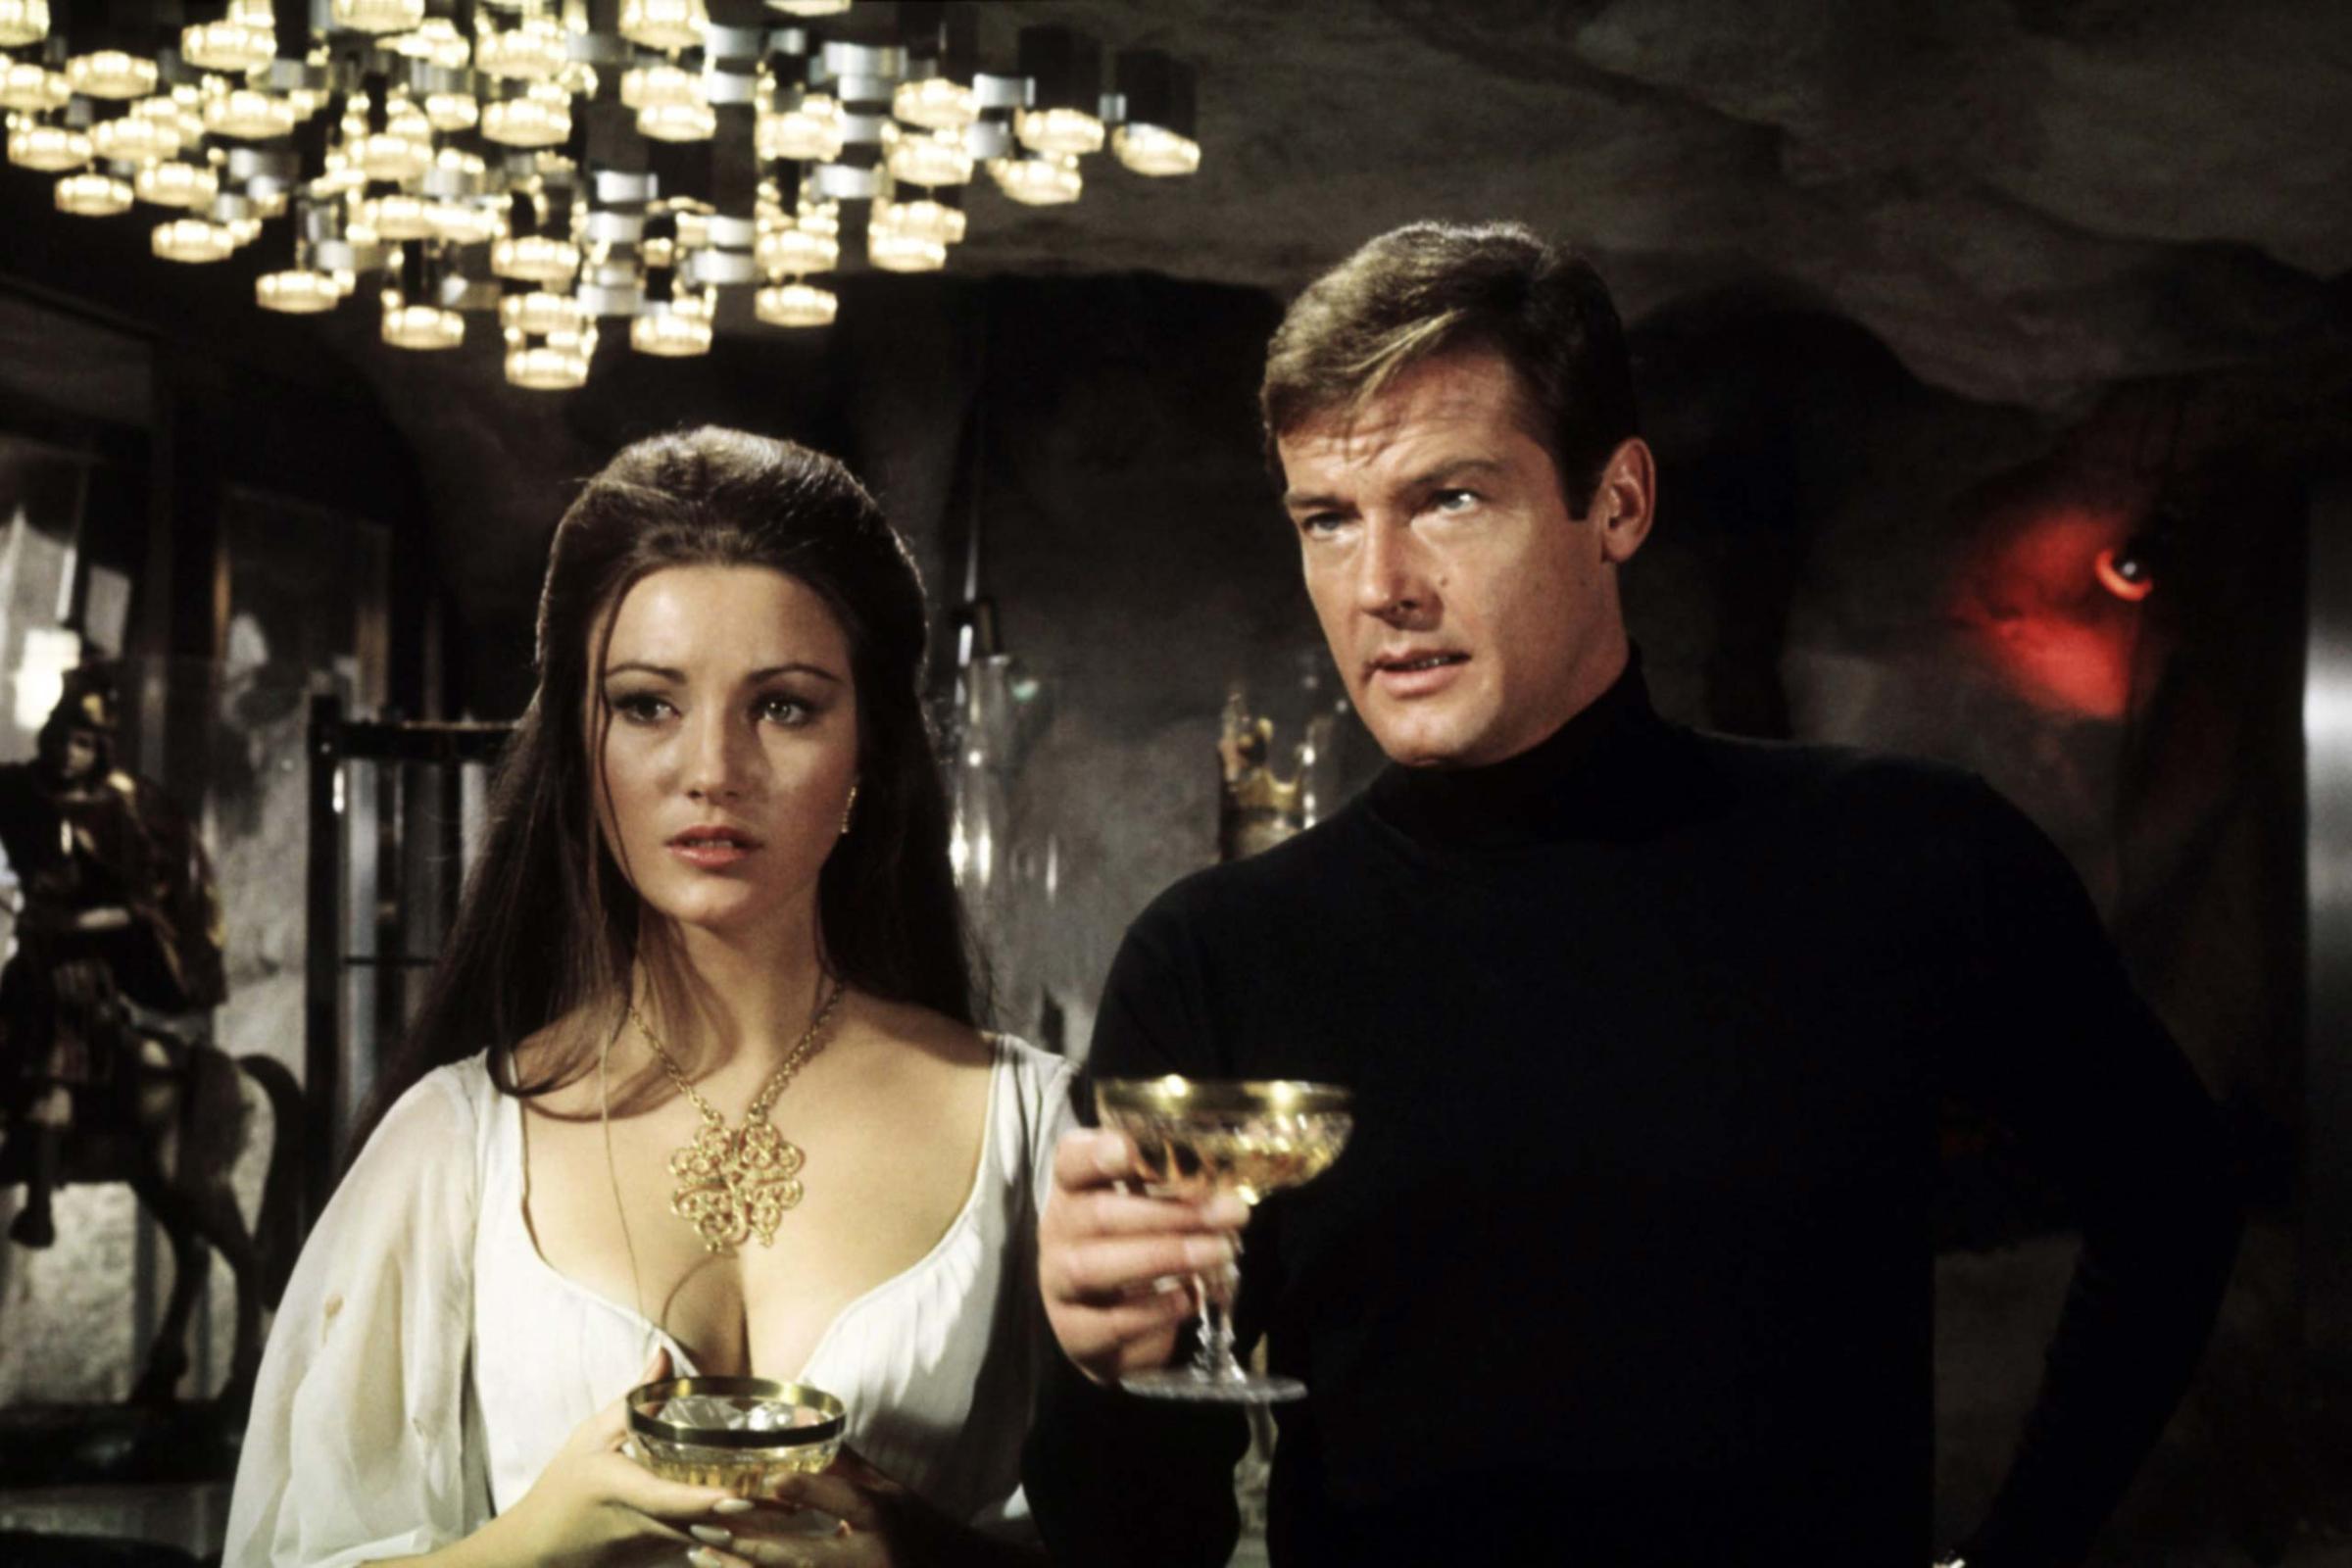 LIVE AND LET DIE, from left: Jane Seymour, Roger Moore, 1973, liveandletdie1973-fsct17, Photo by: Ev